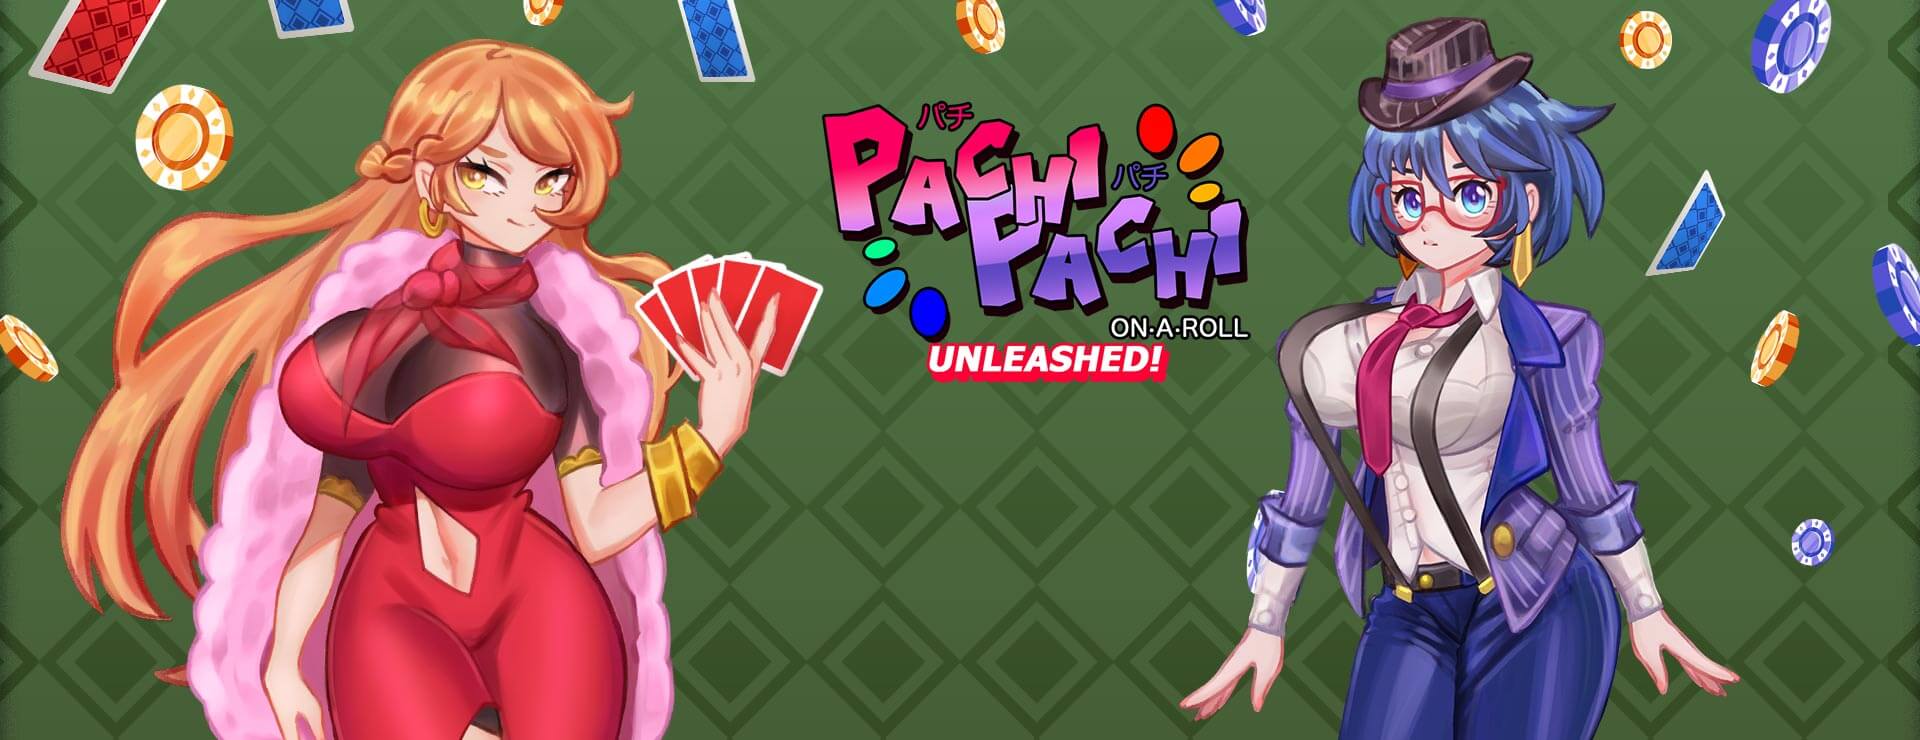 Pachi Pachi On A Roll Unleashed - Zwanglos  Spiel